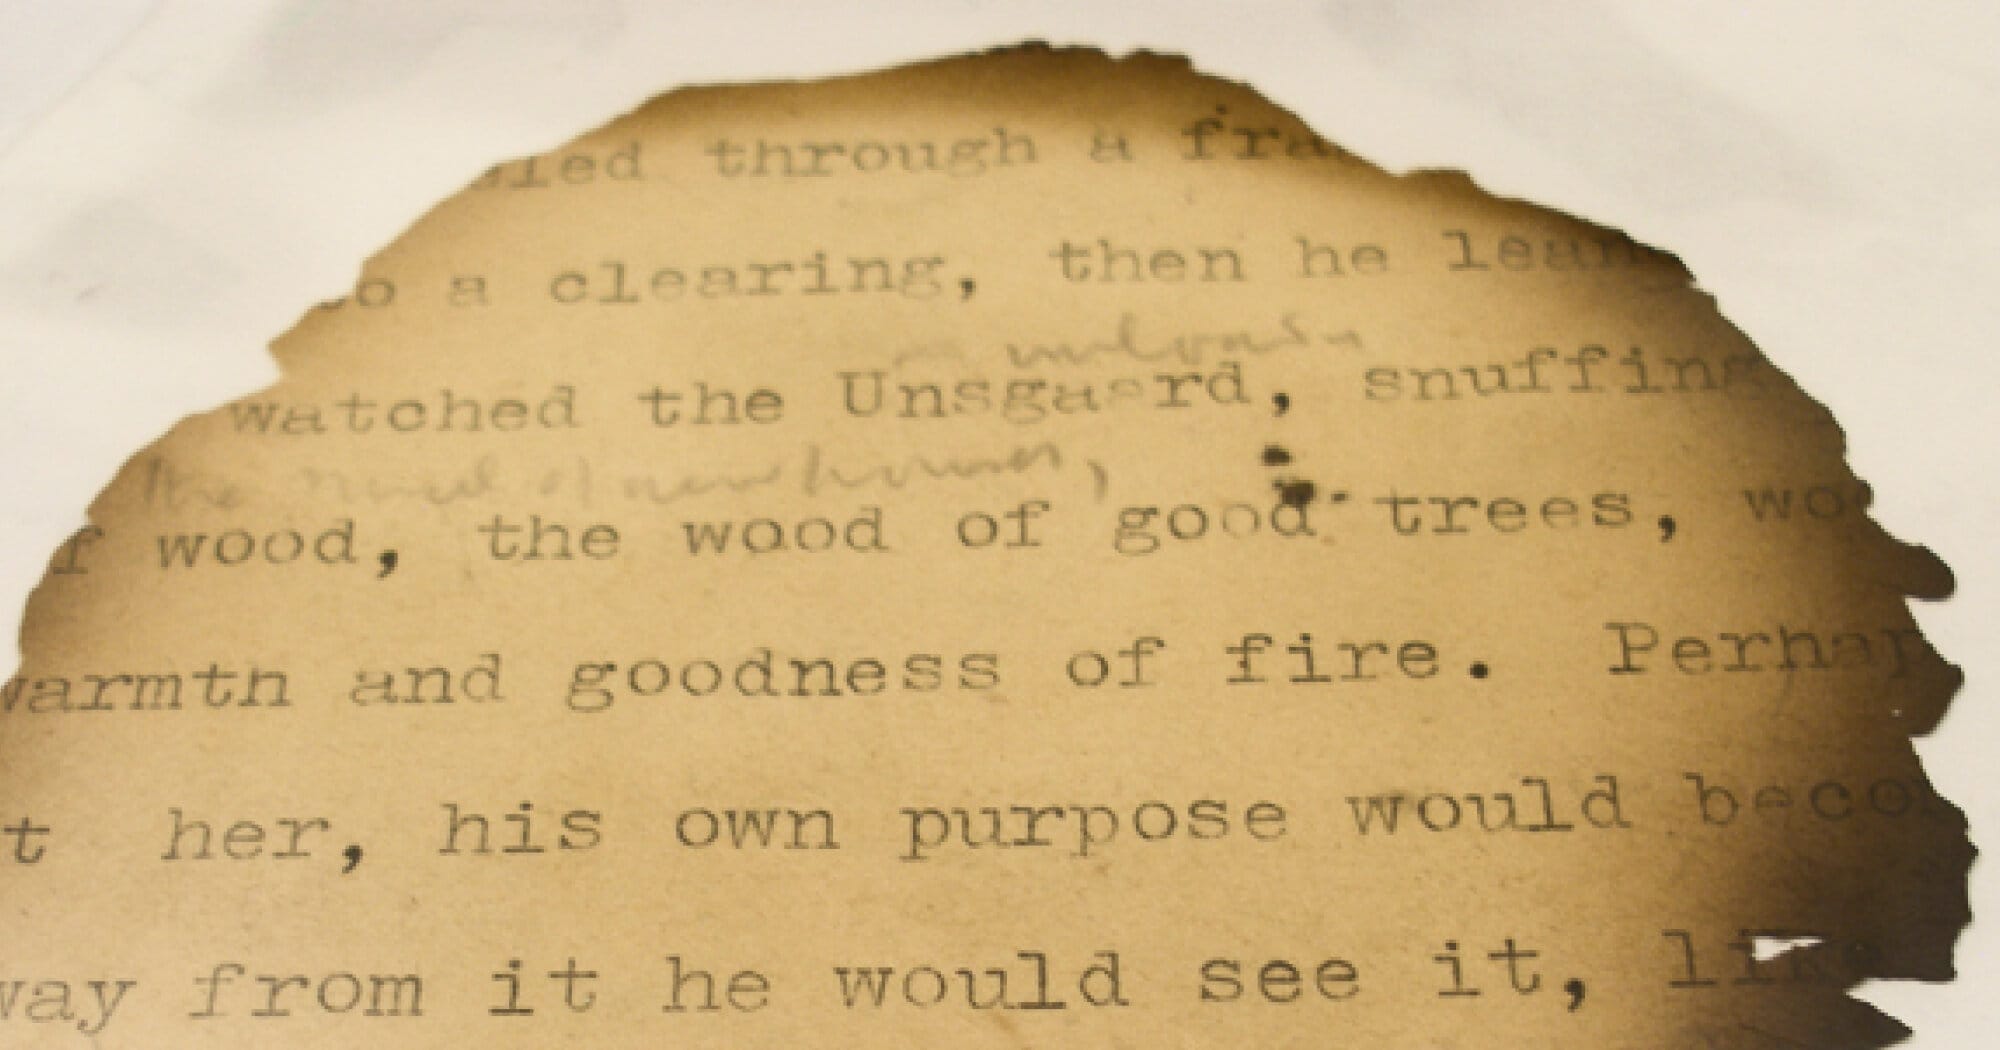 Photograph showing a typescript fragment of Malcolm Lowry's 'In Ballast to the White Sea', with charred edges. The words 